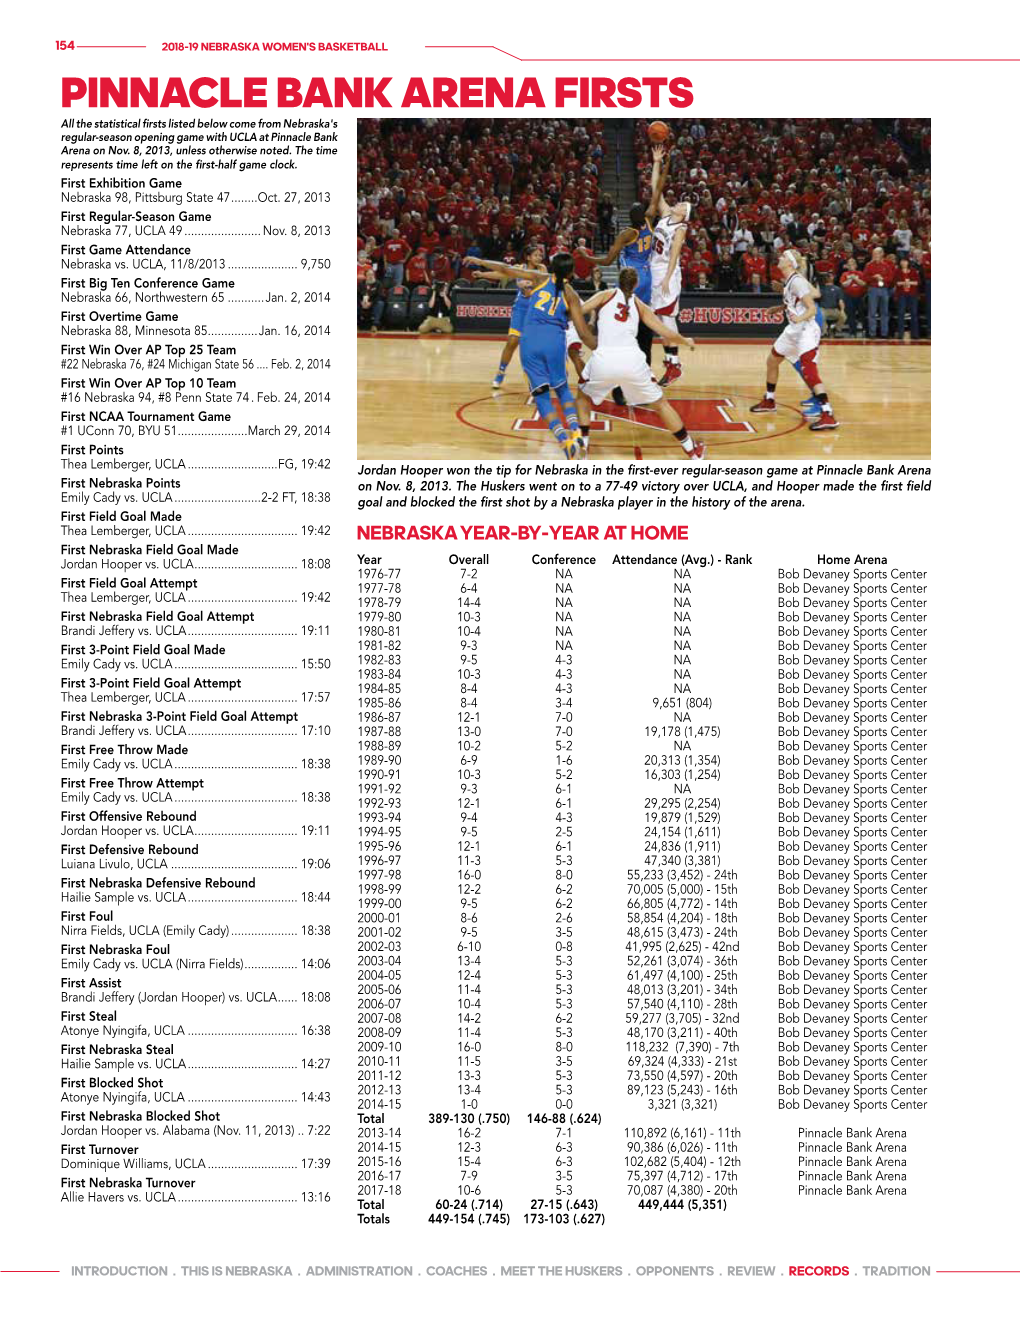 PINNACLE BANK ARENA FIRSTS All the Statistical Firsts Listed Below Come from Nebraska's Regular-Season Opening Game with UCLA at Pinnacle Bank Arena on Nov